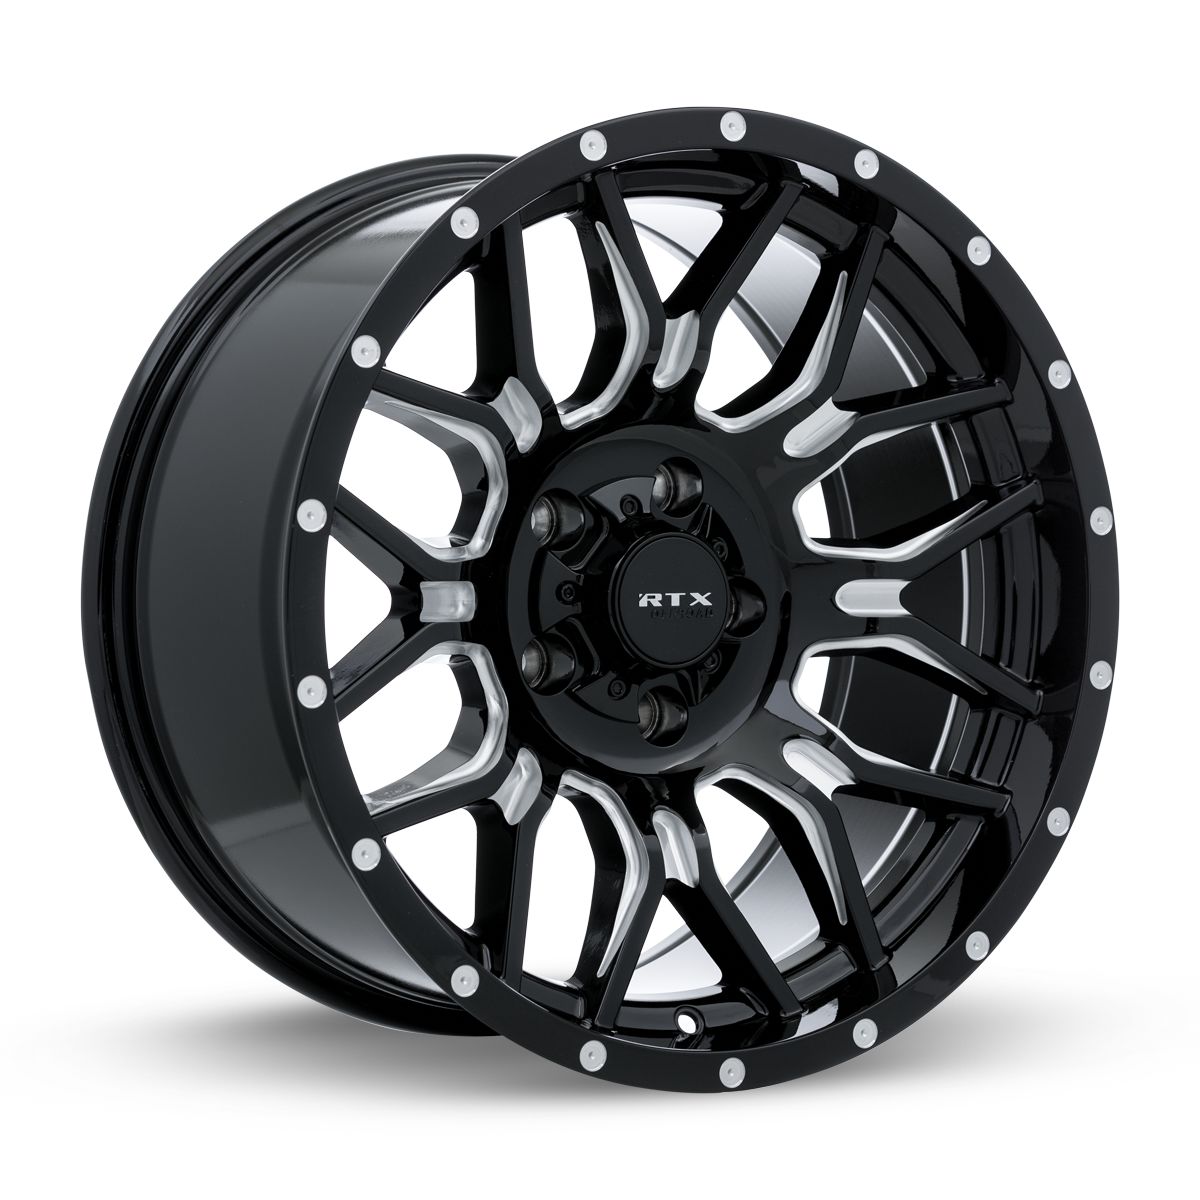 Claw • Gloss Black Milled with Rivets • 18x9 5x127 ET-12 CB71.5